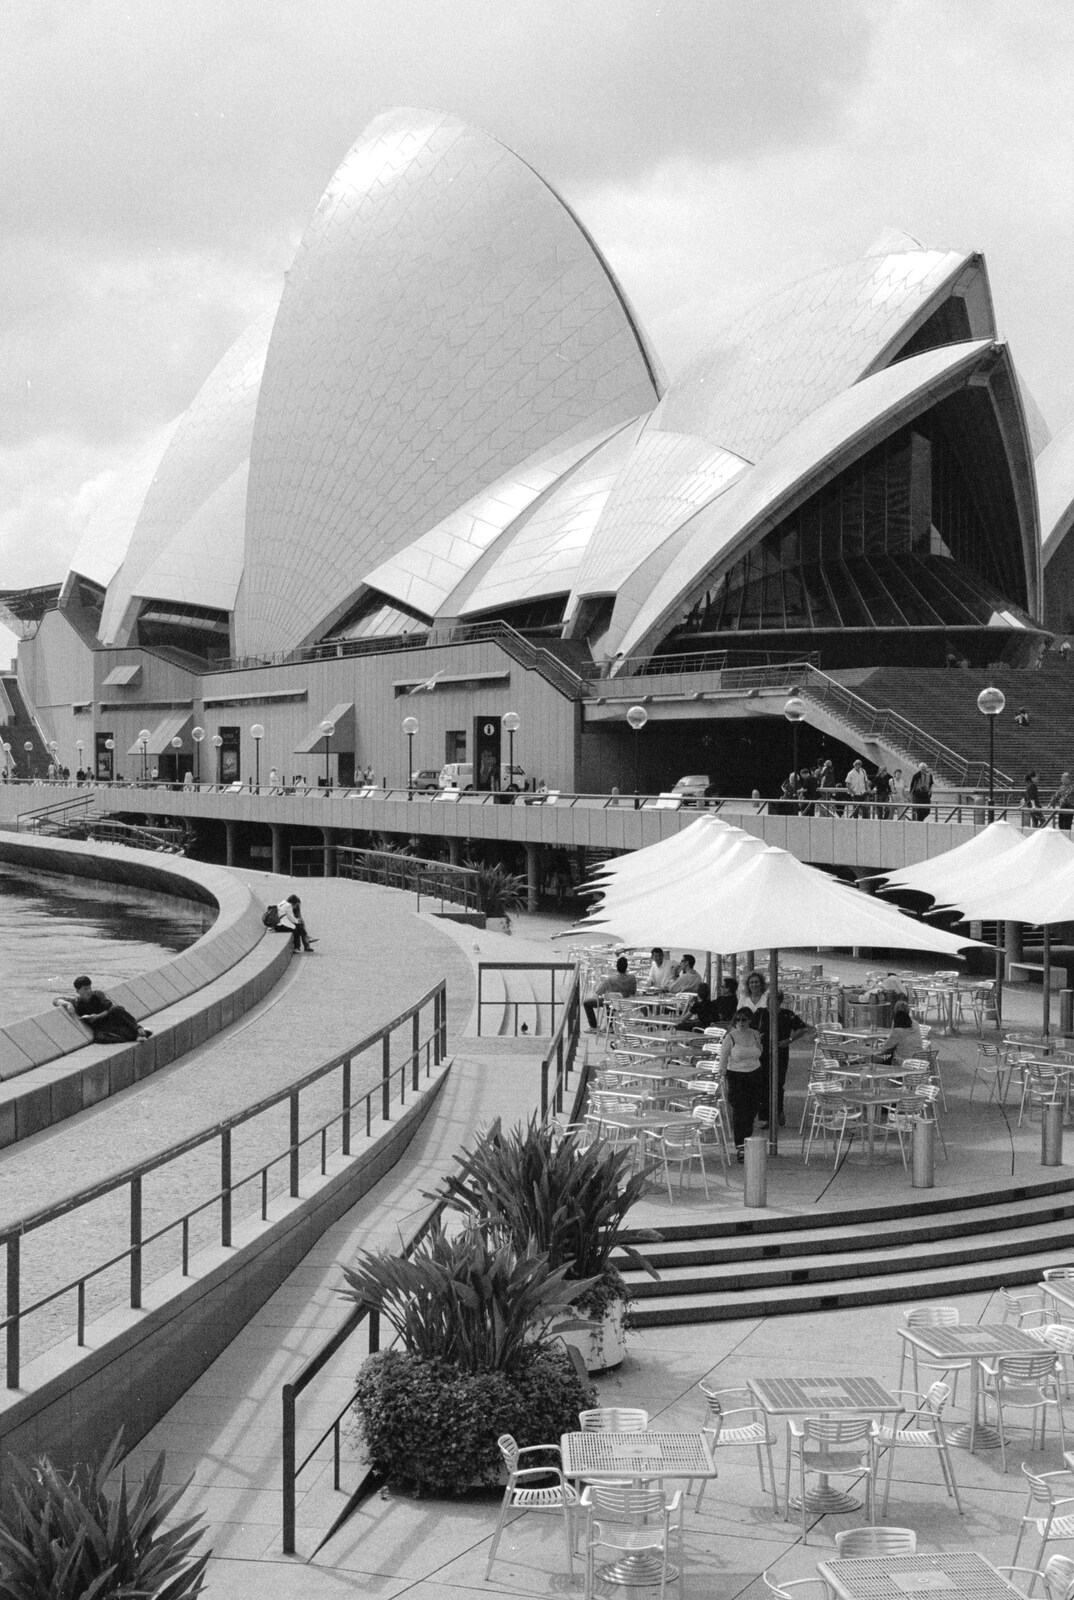 More opera house from A Trip to the Blue Mountains, New South Wales, Australia - 12th April 2000